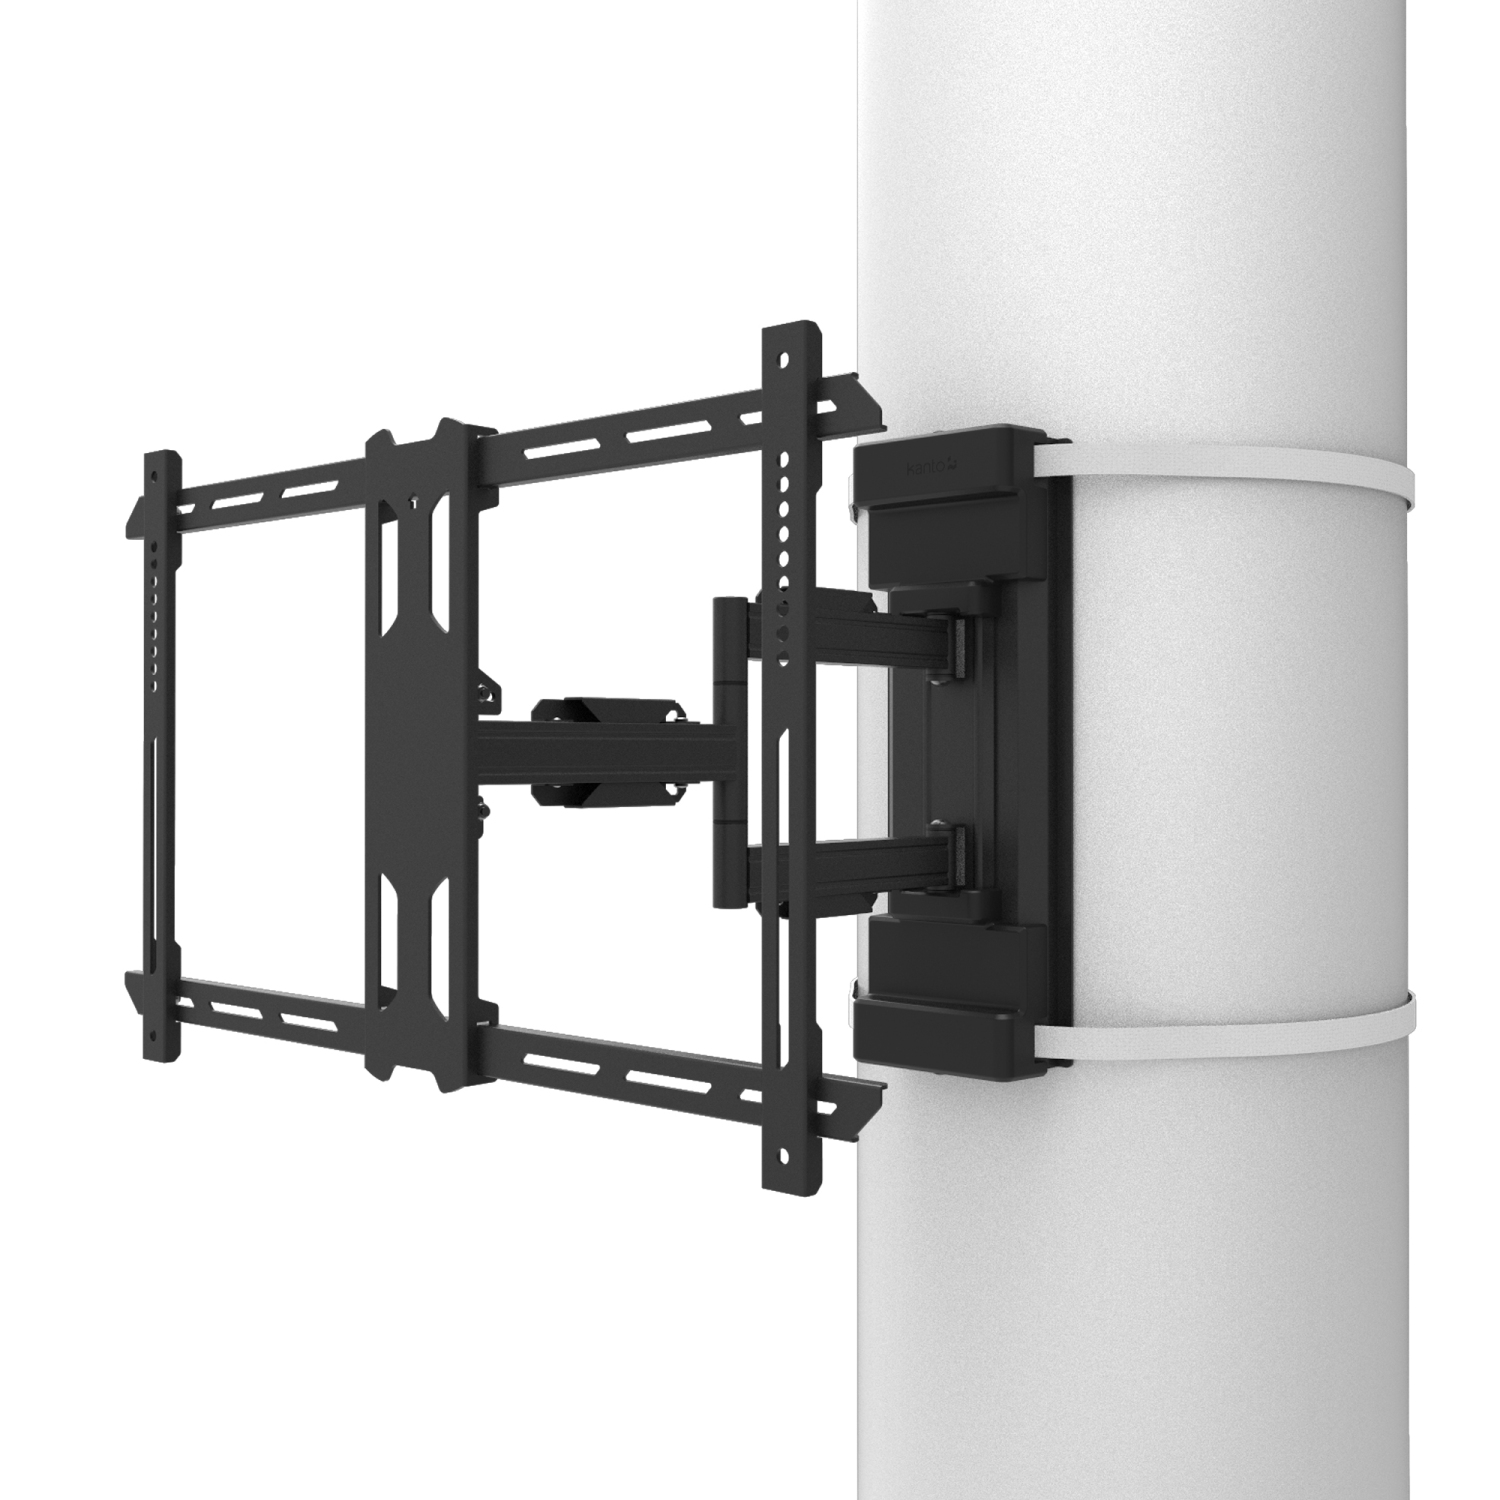 Kanto PSC350 No Drill Column and Pillar TV Mount for 37" to 75" TVs